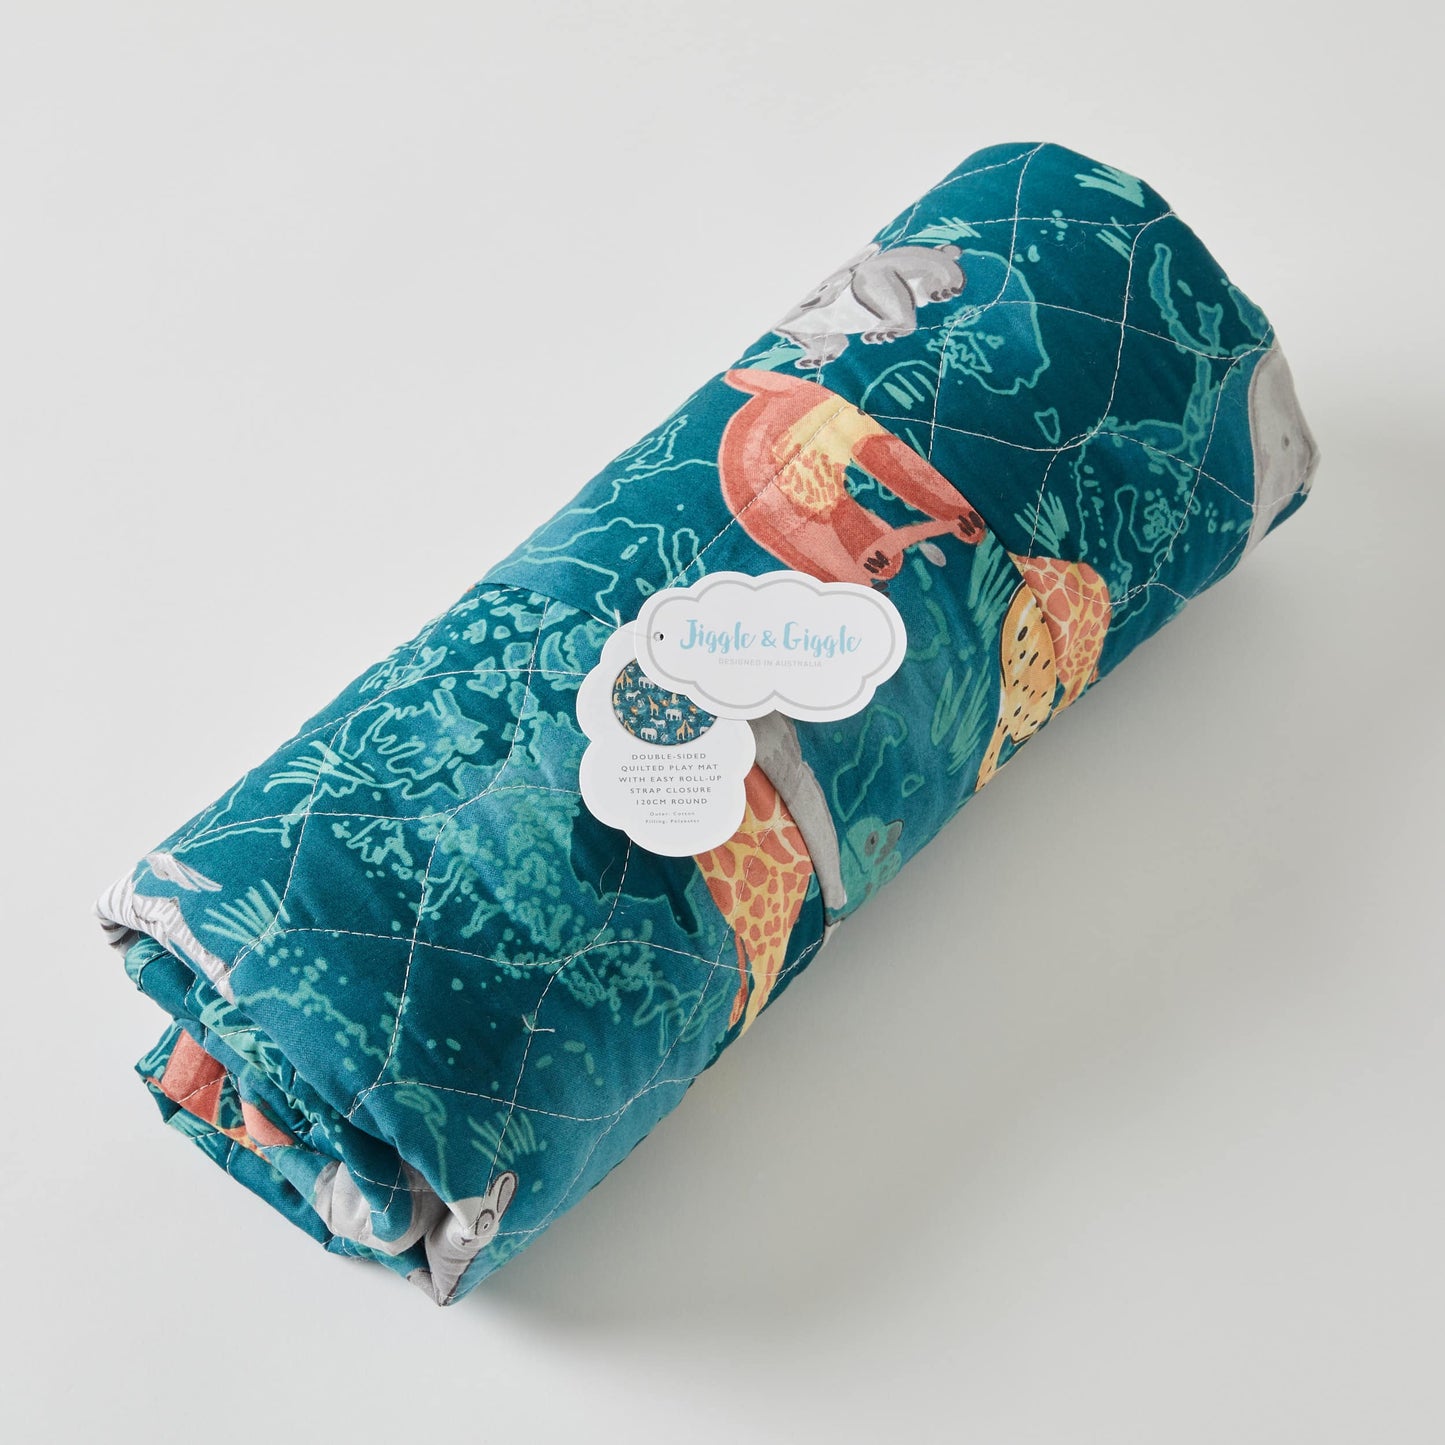 Jungle Explorer Quilt Cover Set by Jiggle & Giggle